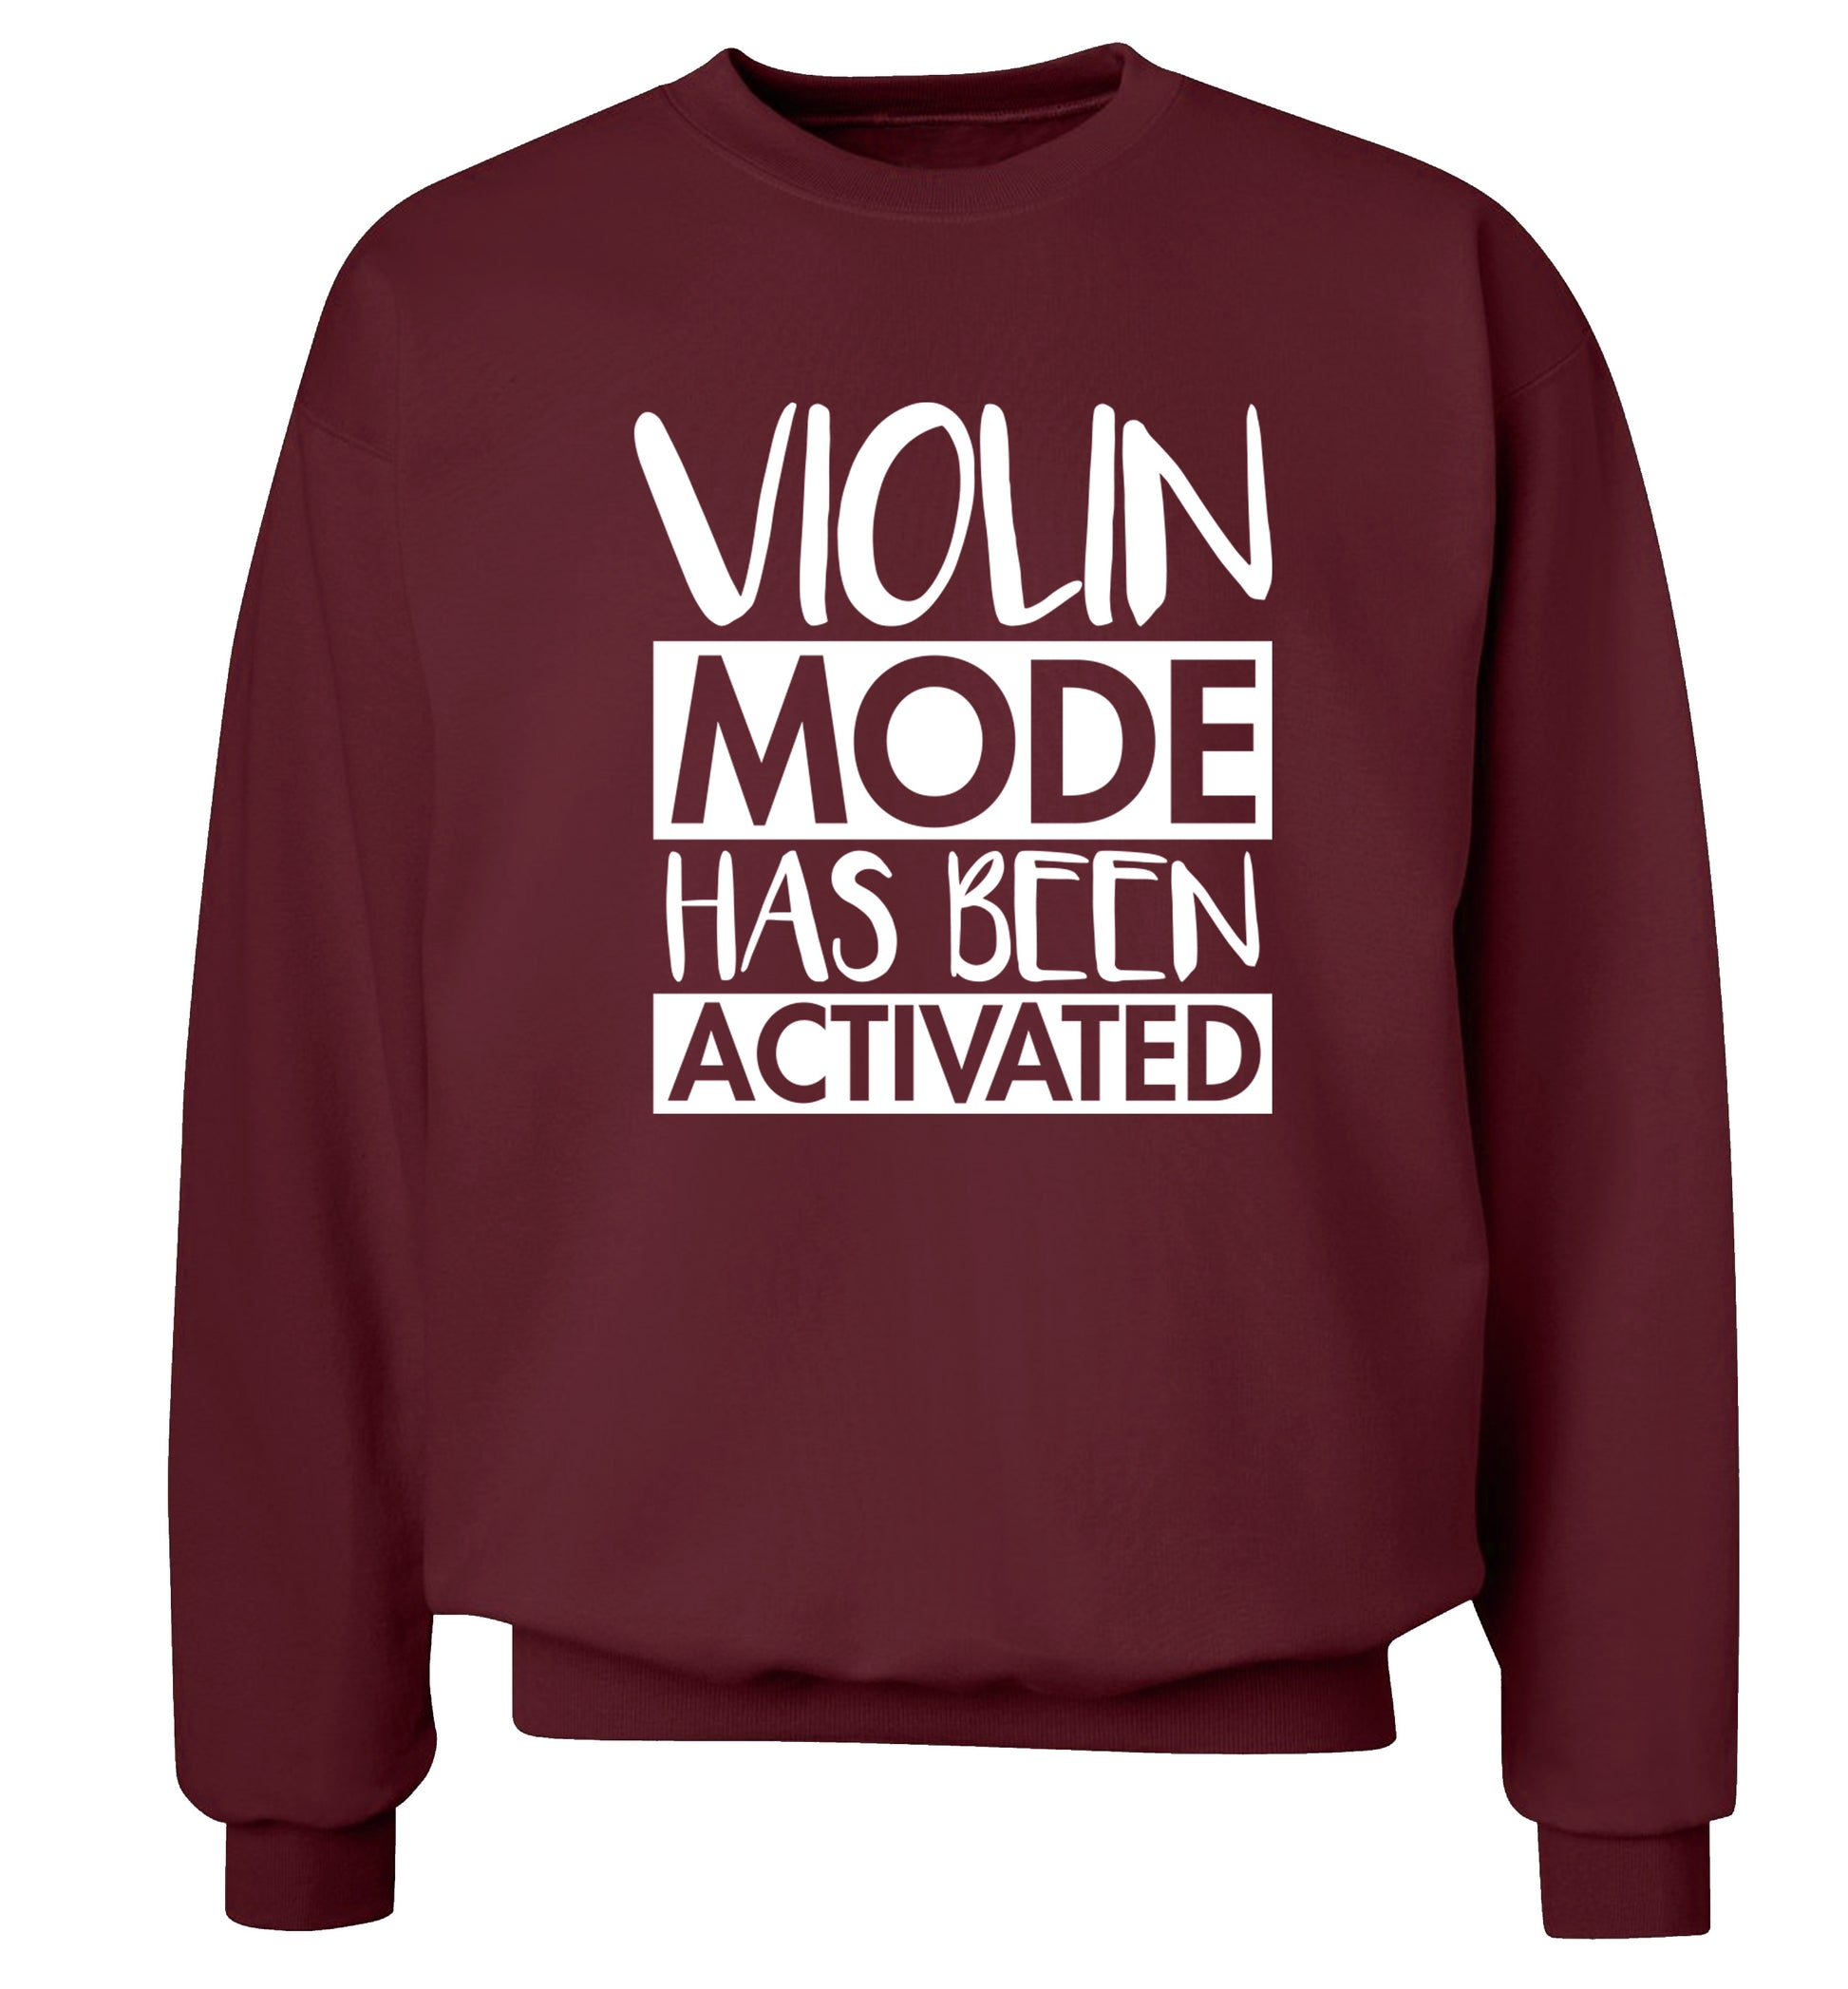 Violin Mode Activated Adult's unisex maroon Sweater 2XL